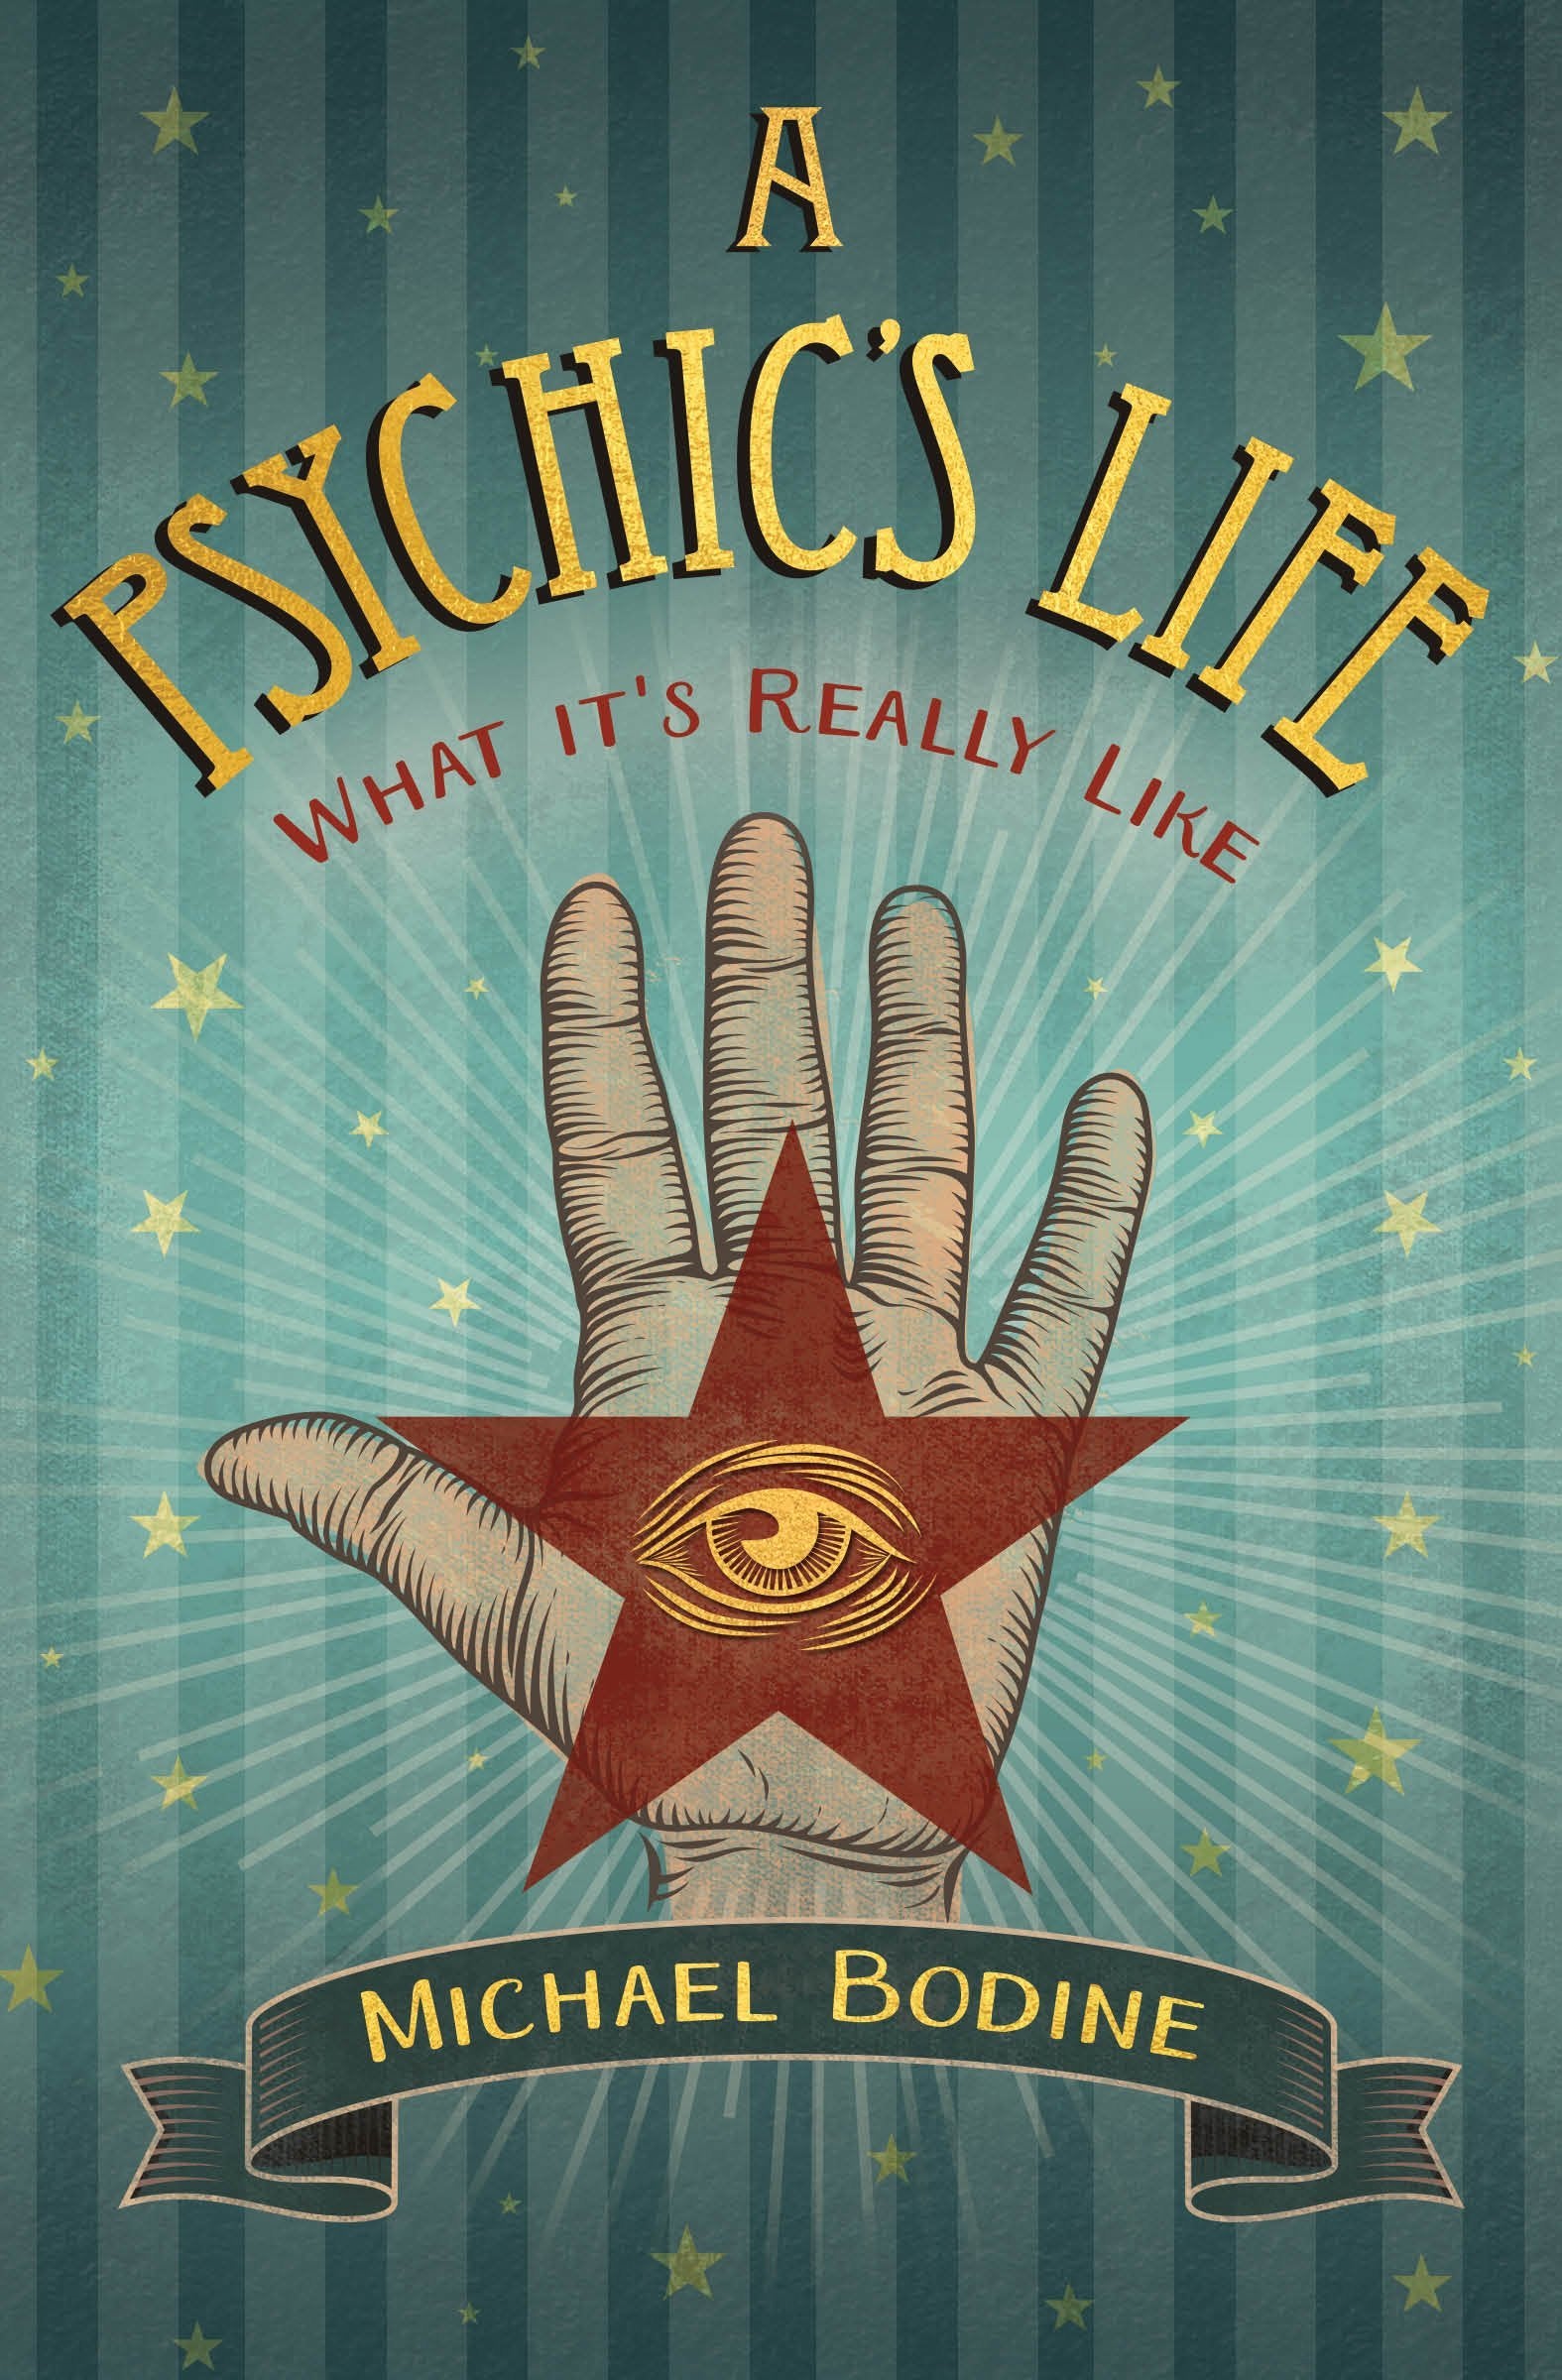 a psychic's life